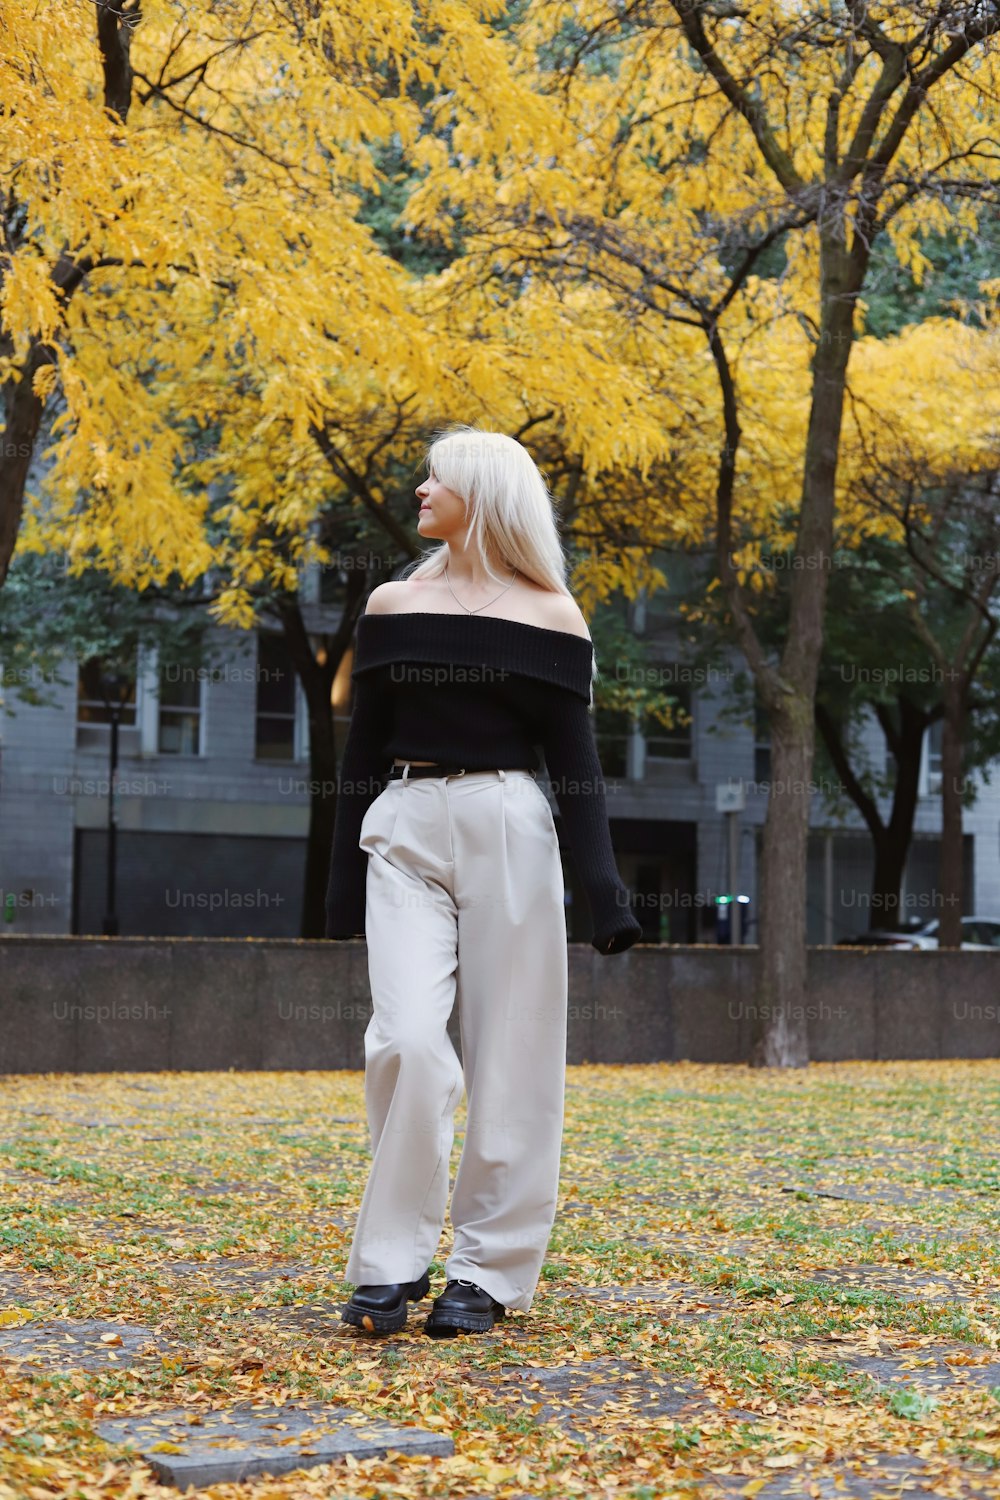 a woman in a black off the shoulder top is standing in a park